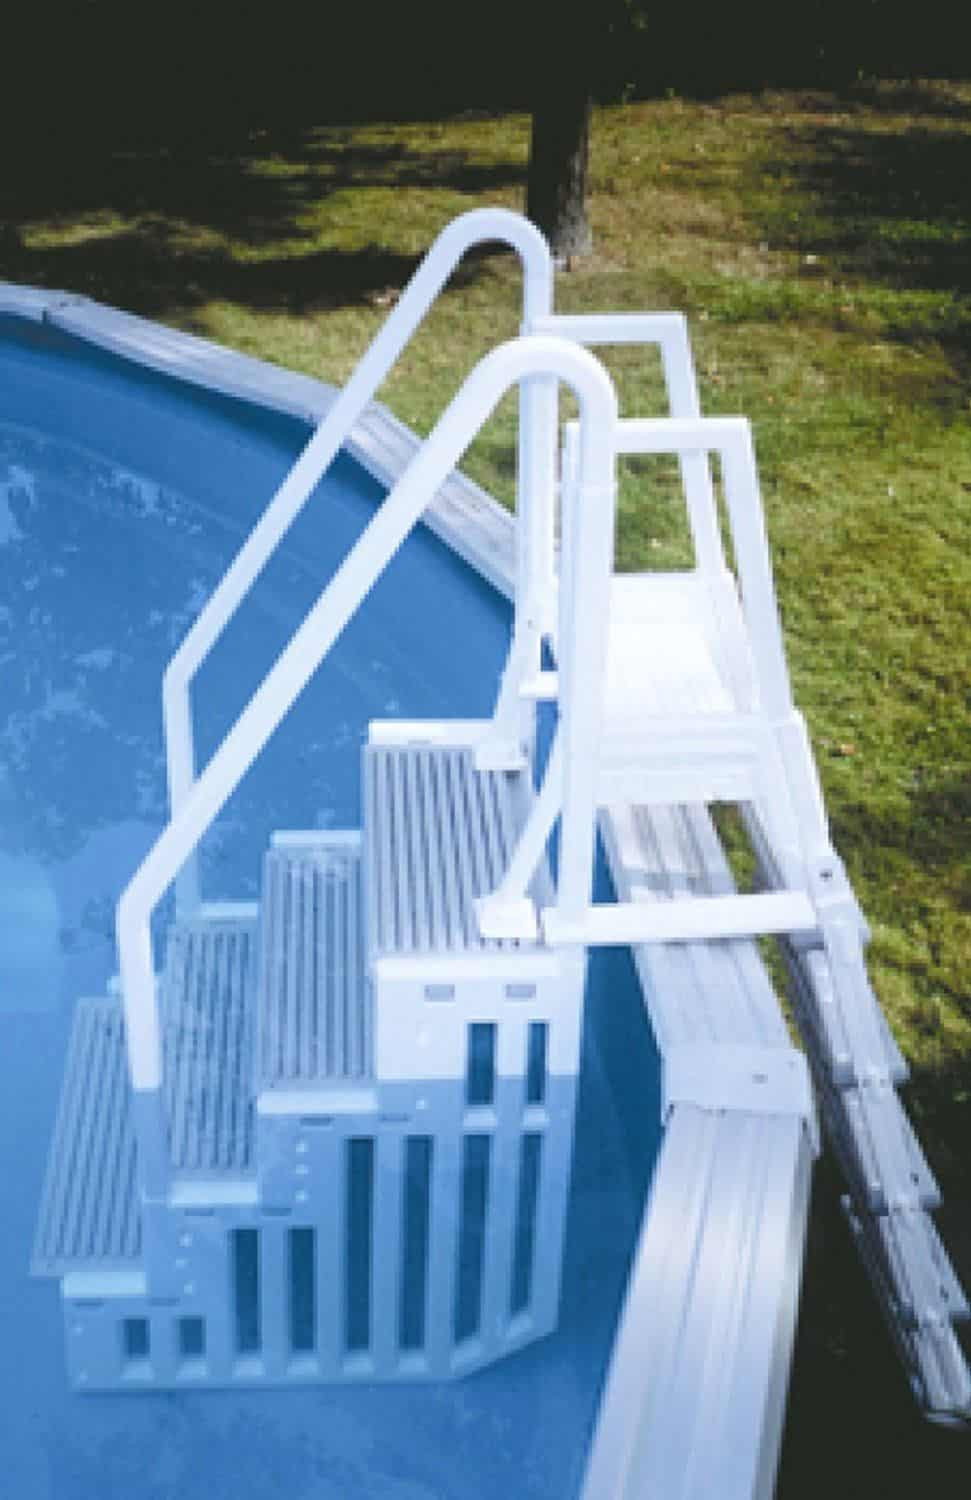 Above Ground Pool Stairs Steps
 The Best Ground Pool Ladders and Steps Home Pools Plus